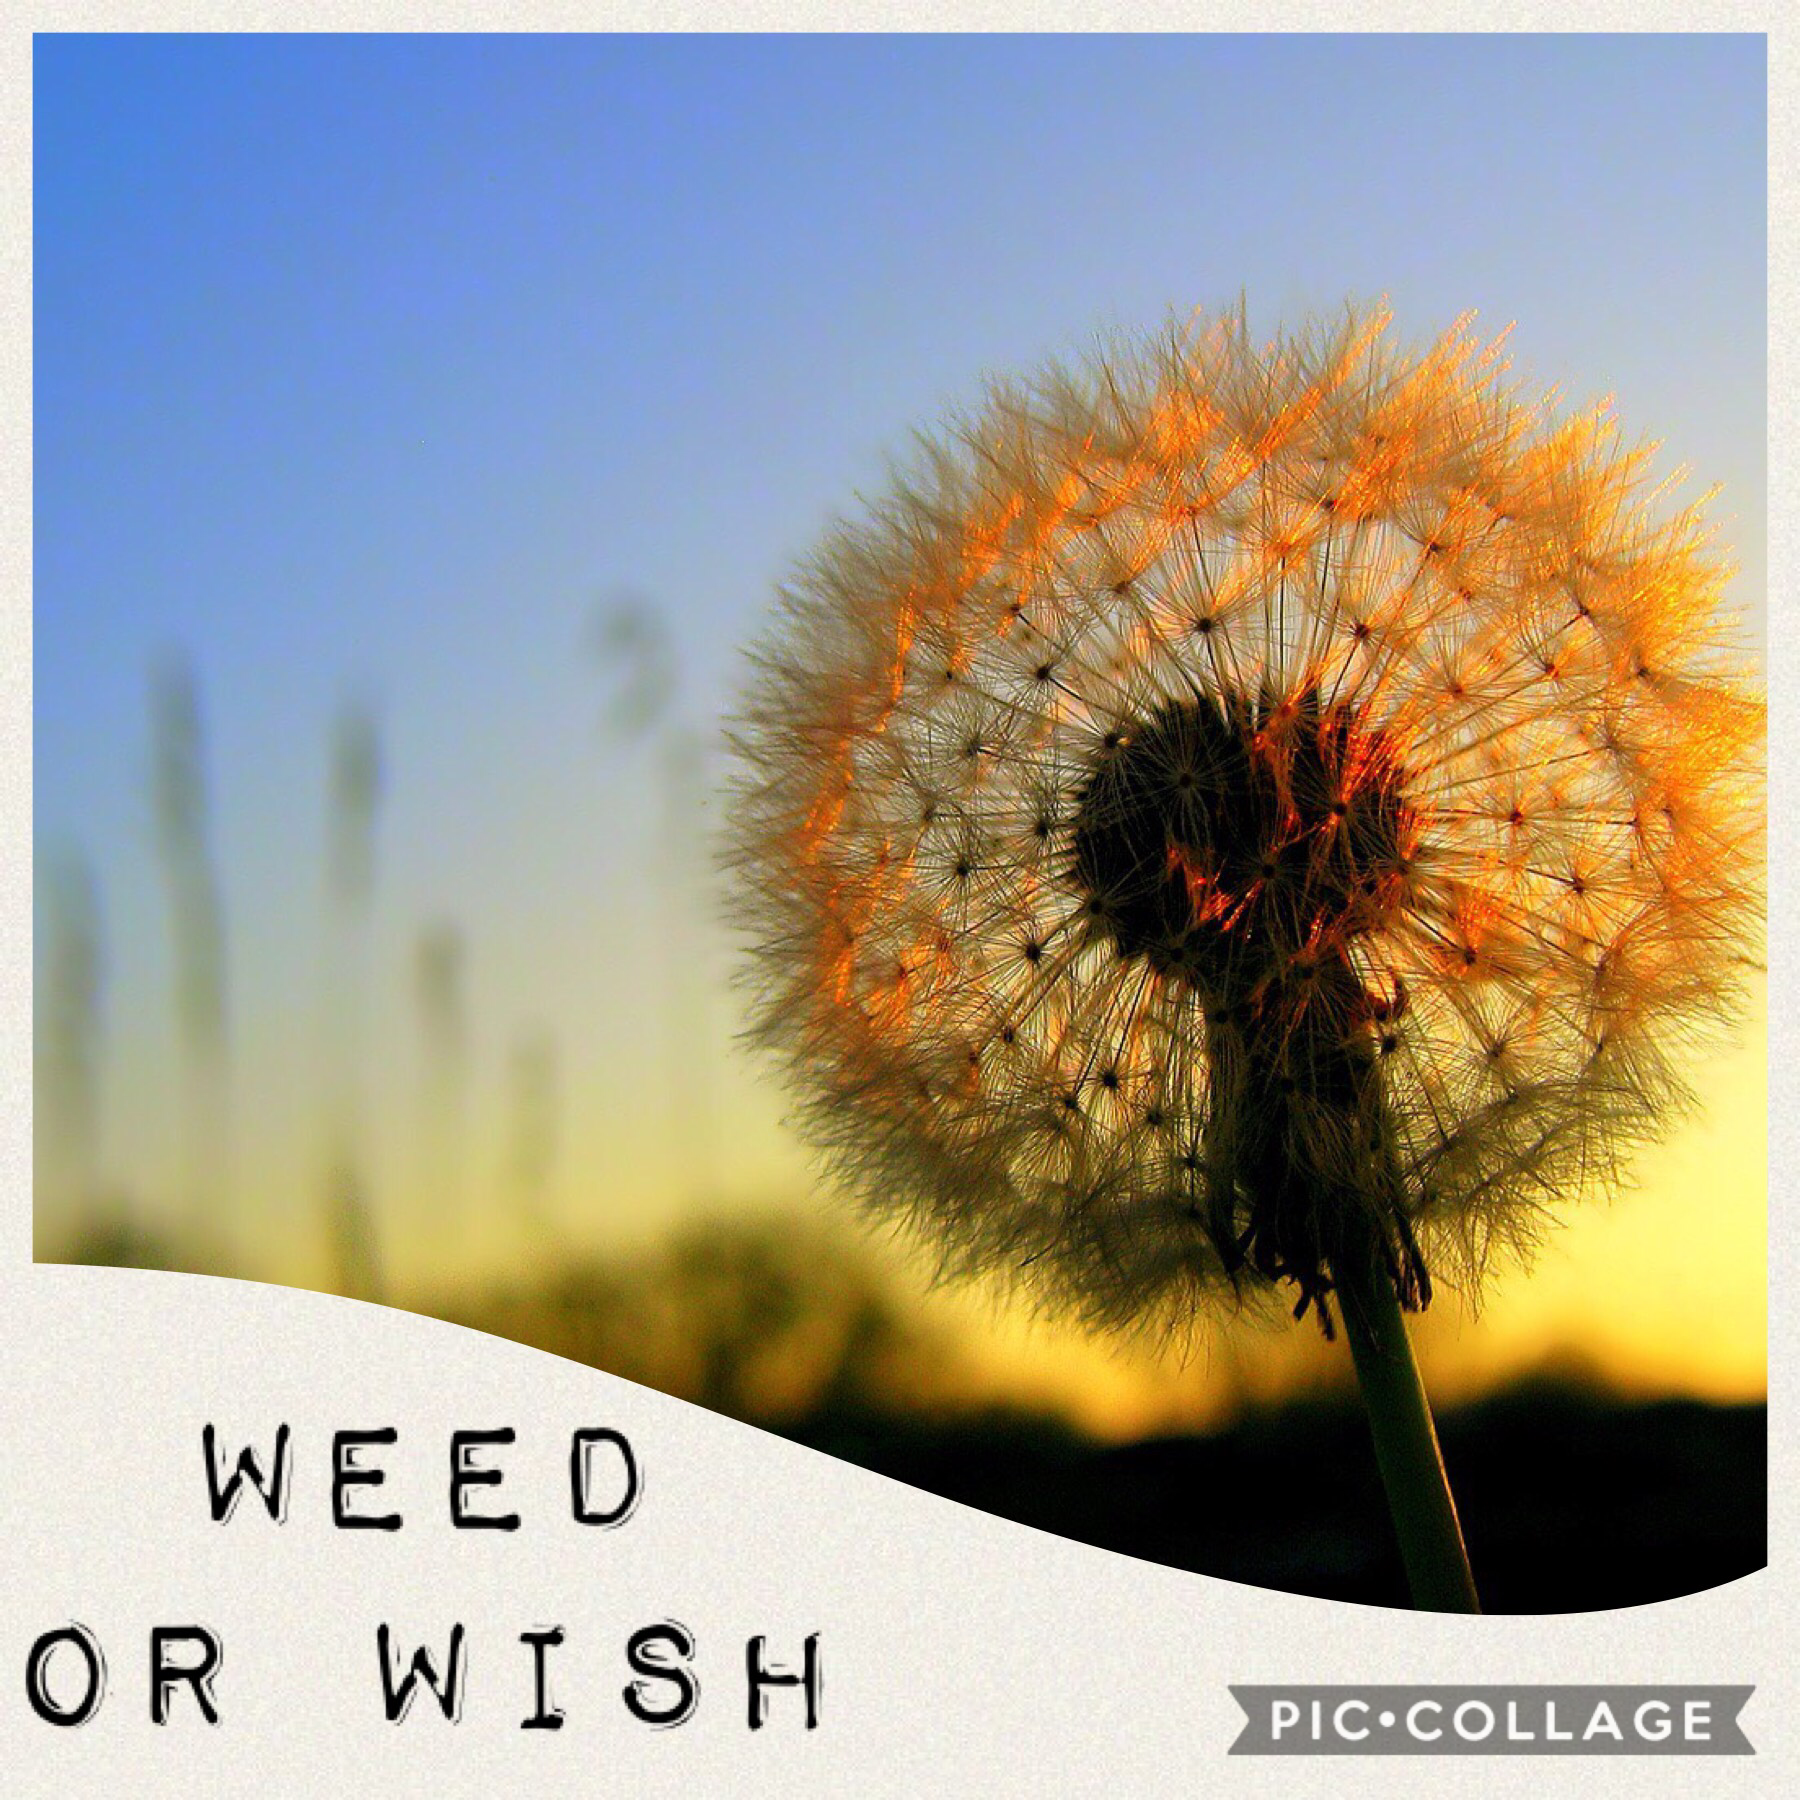 Some see a wish and some see a weed..... which do you see???  